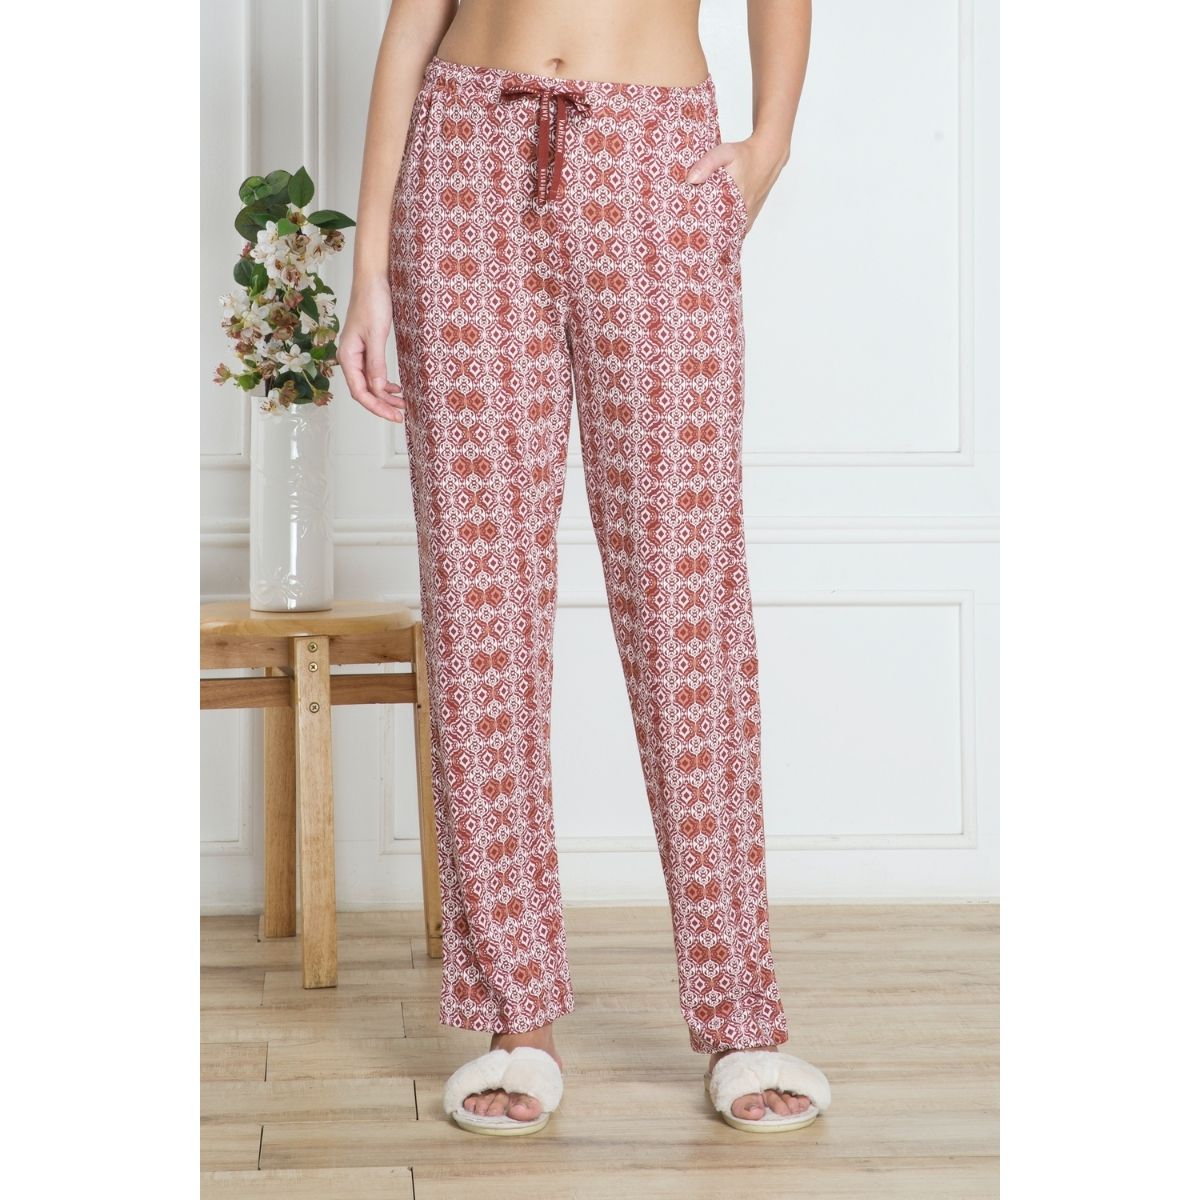 Buy ladies night pants for women in India @ Limeroad